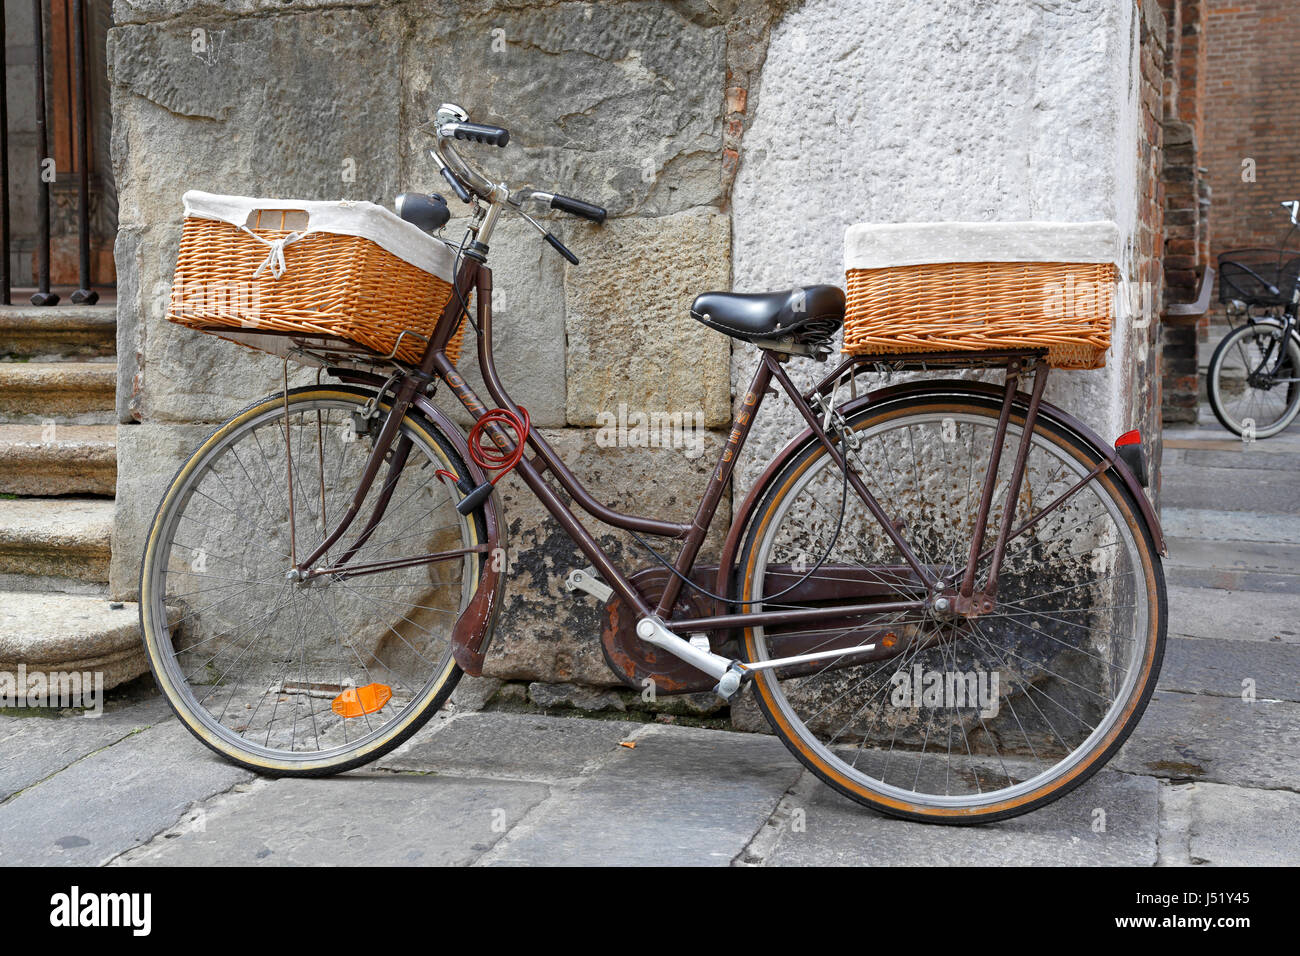 Old bicycle with wicker baskets leaning against an old stone building in Piacenza, Emilia-Romagna, Italy, Europe. Stock Photo